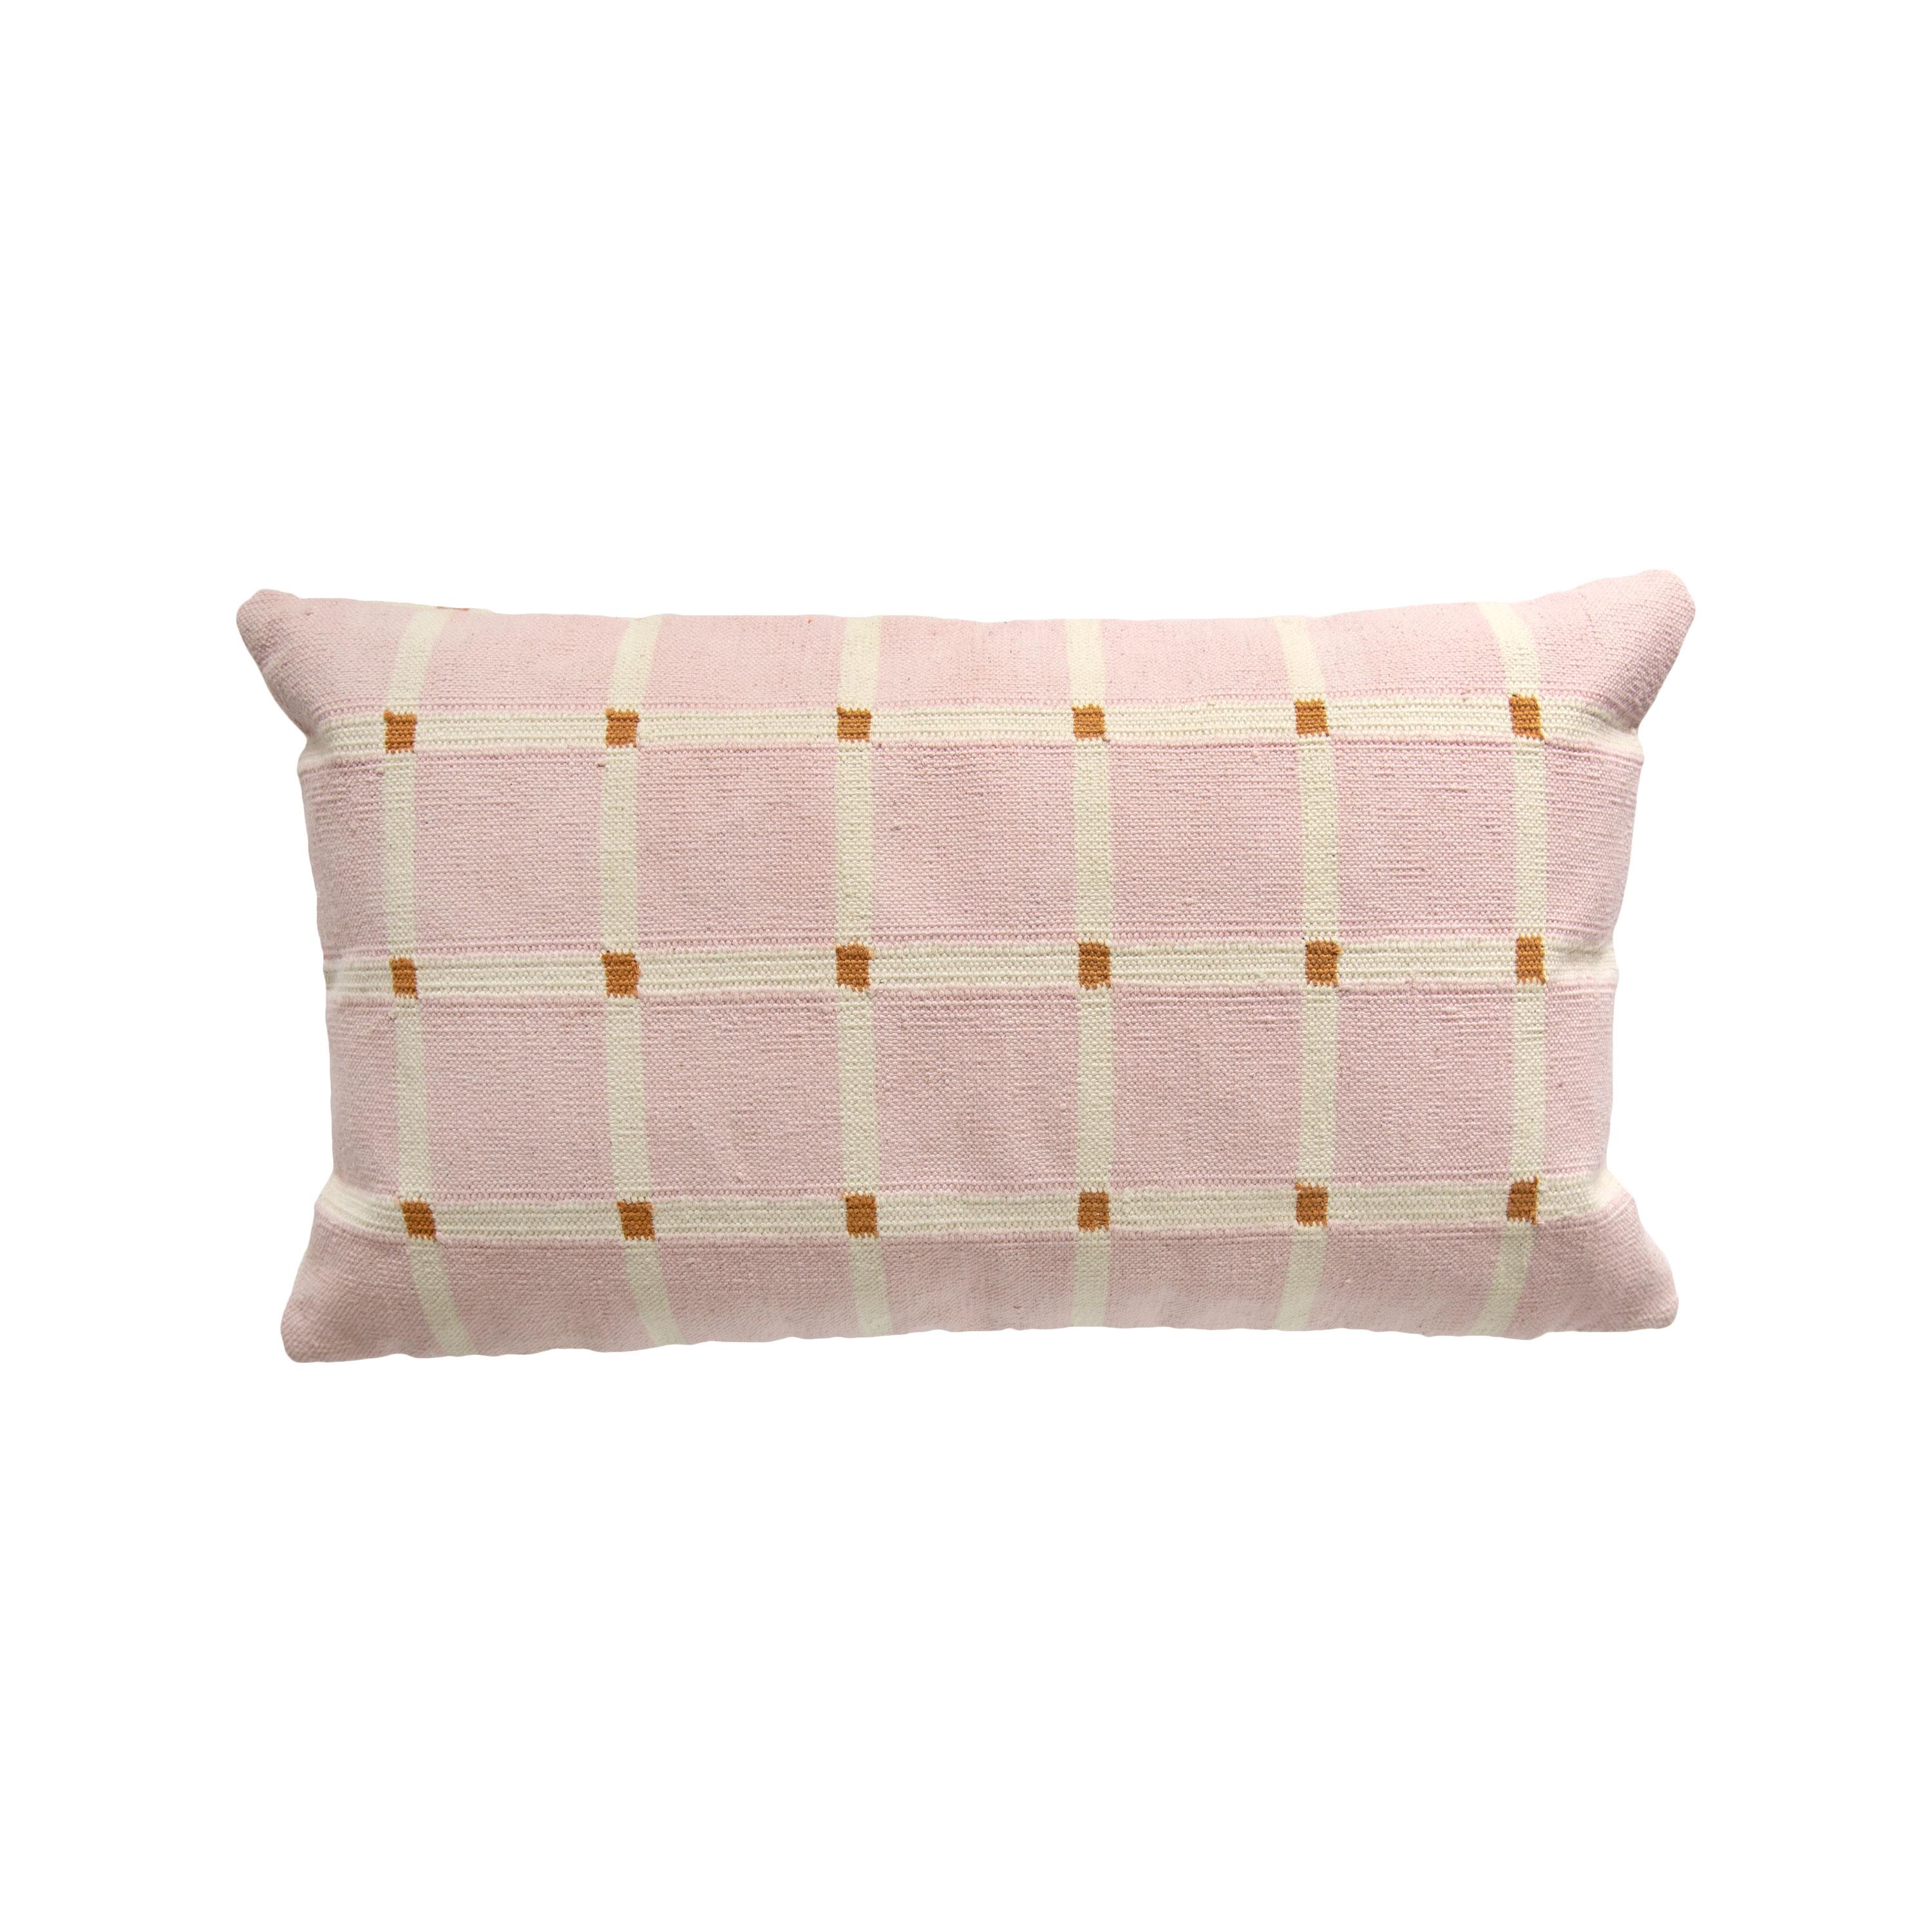 This pillow is reversible!

Our grid pillows are ethically hand woven by artisans in Rajasthan, India, using a traditional weaving technique which is native to this region.

The purchase of this handcrafted pillow helps to support the artisans